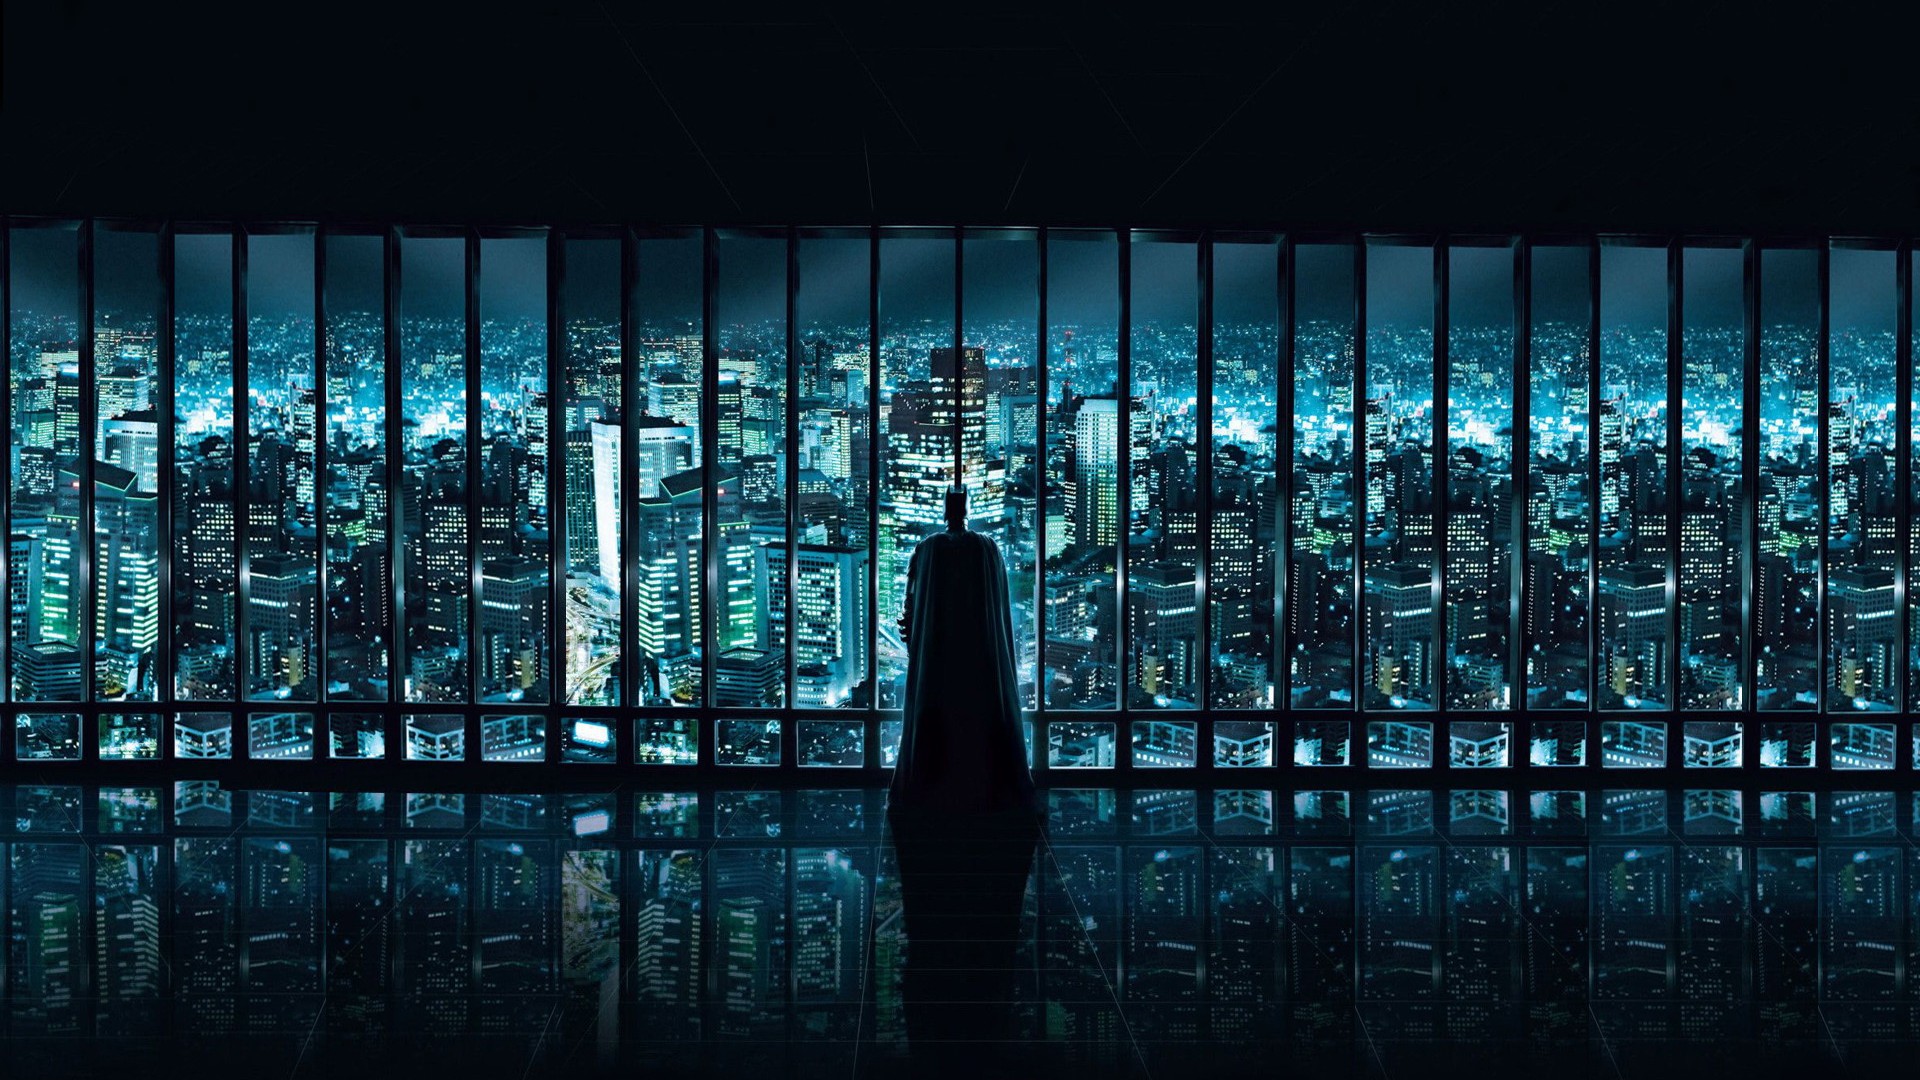 Dark Knight HD Background Wallpaper And Make This For Your